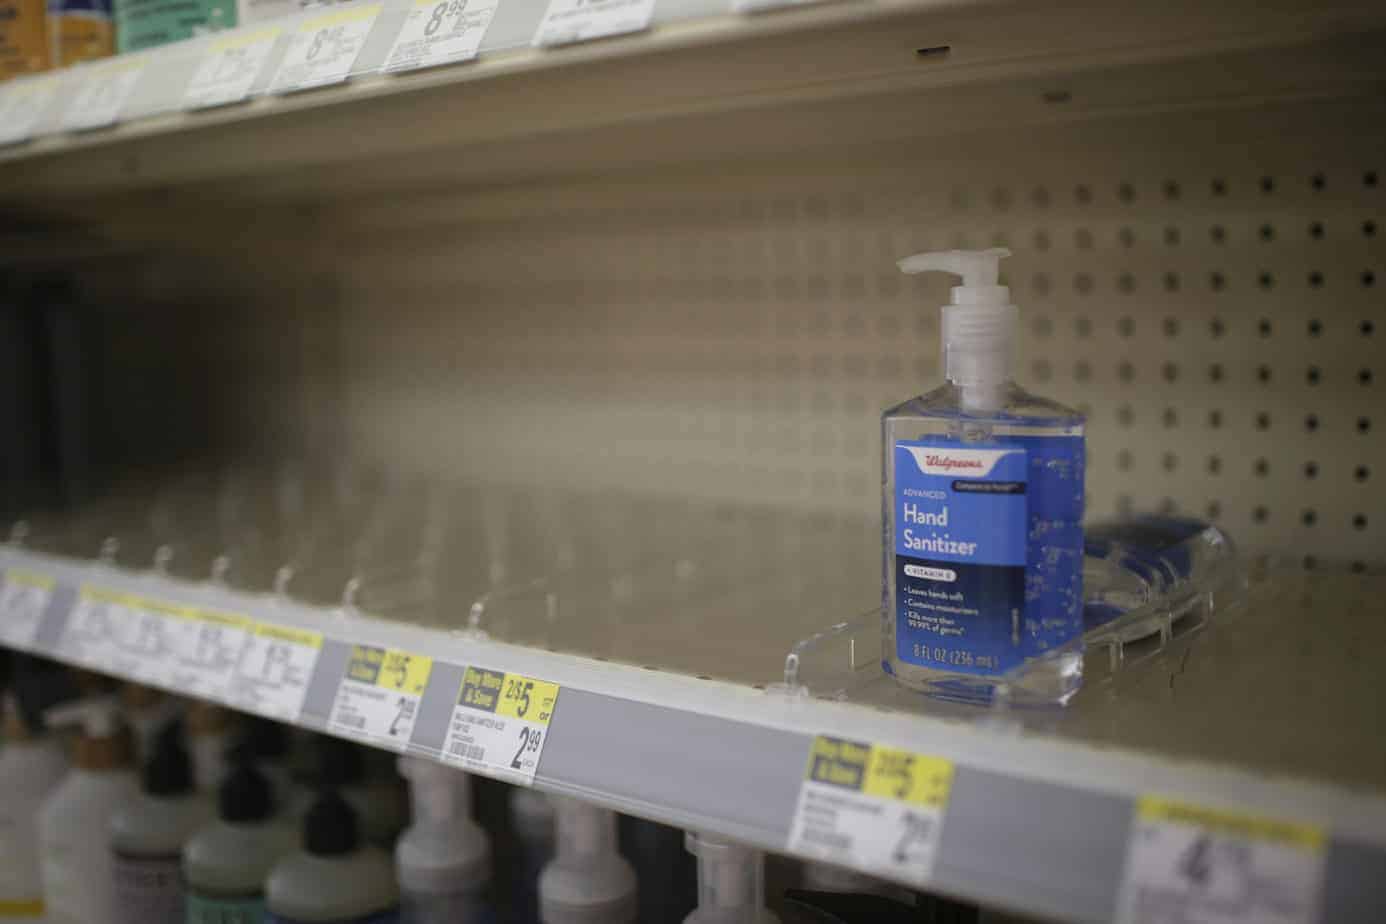 FILE - In this Feb. 28, 2020 file photo, rows of hand sanitizer are seen empty at a Walgreens in Idaho Falls, Idaho.  Fear of the coronavirus has led people to stock up on hand sanitizer, leaving store shelves empty and online retailers with sky-high prices set by those trying to profit on the rush. (John Roark/The Idaho Post-Register via AP, file)